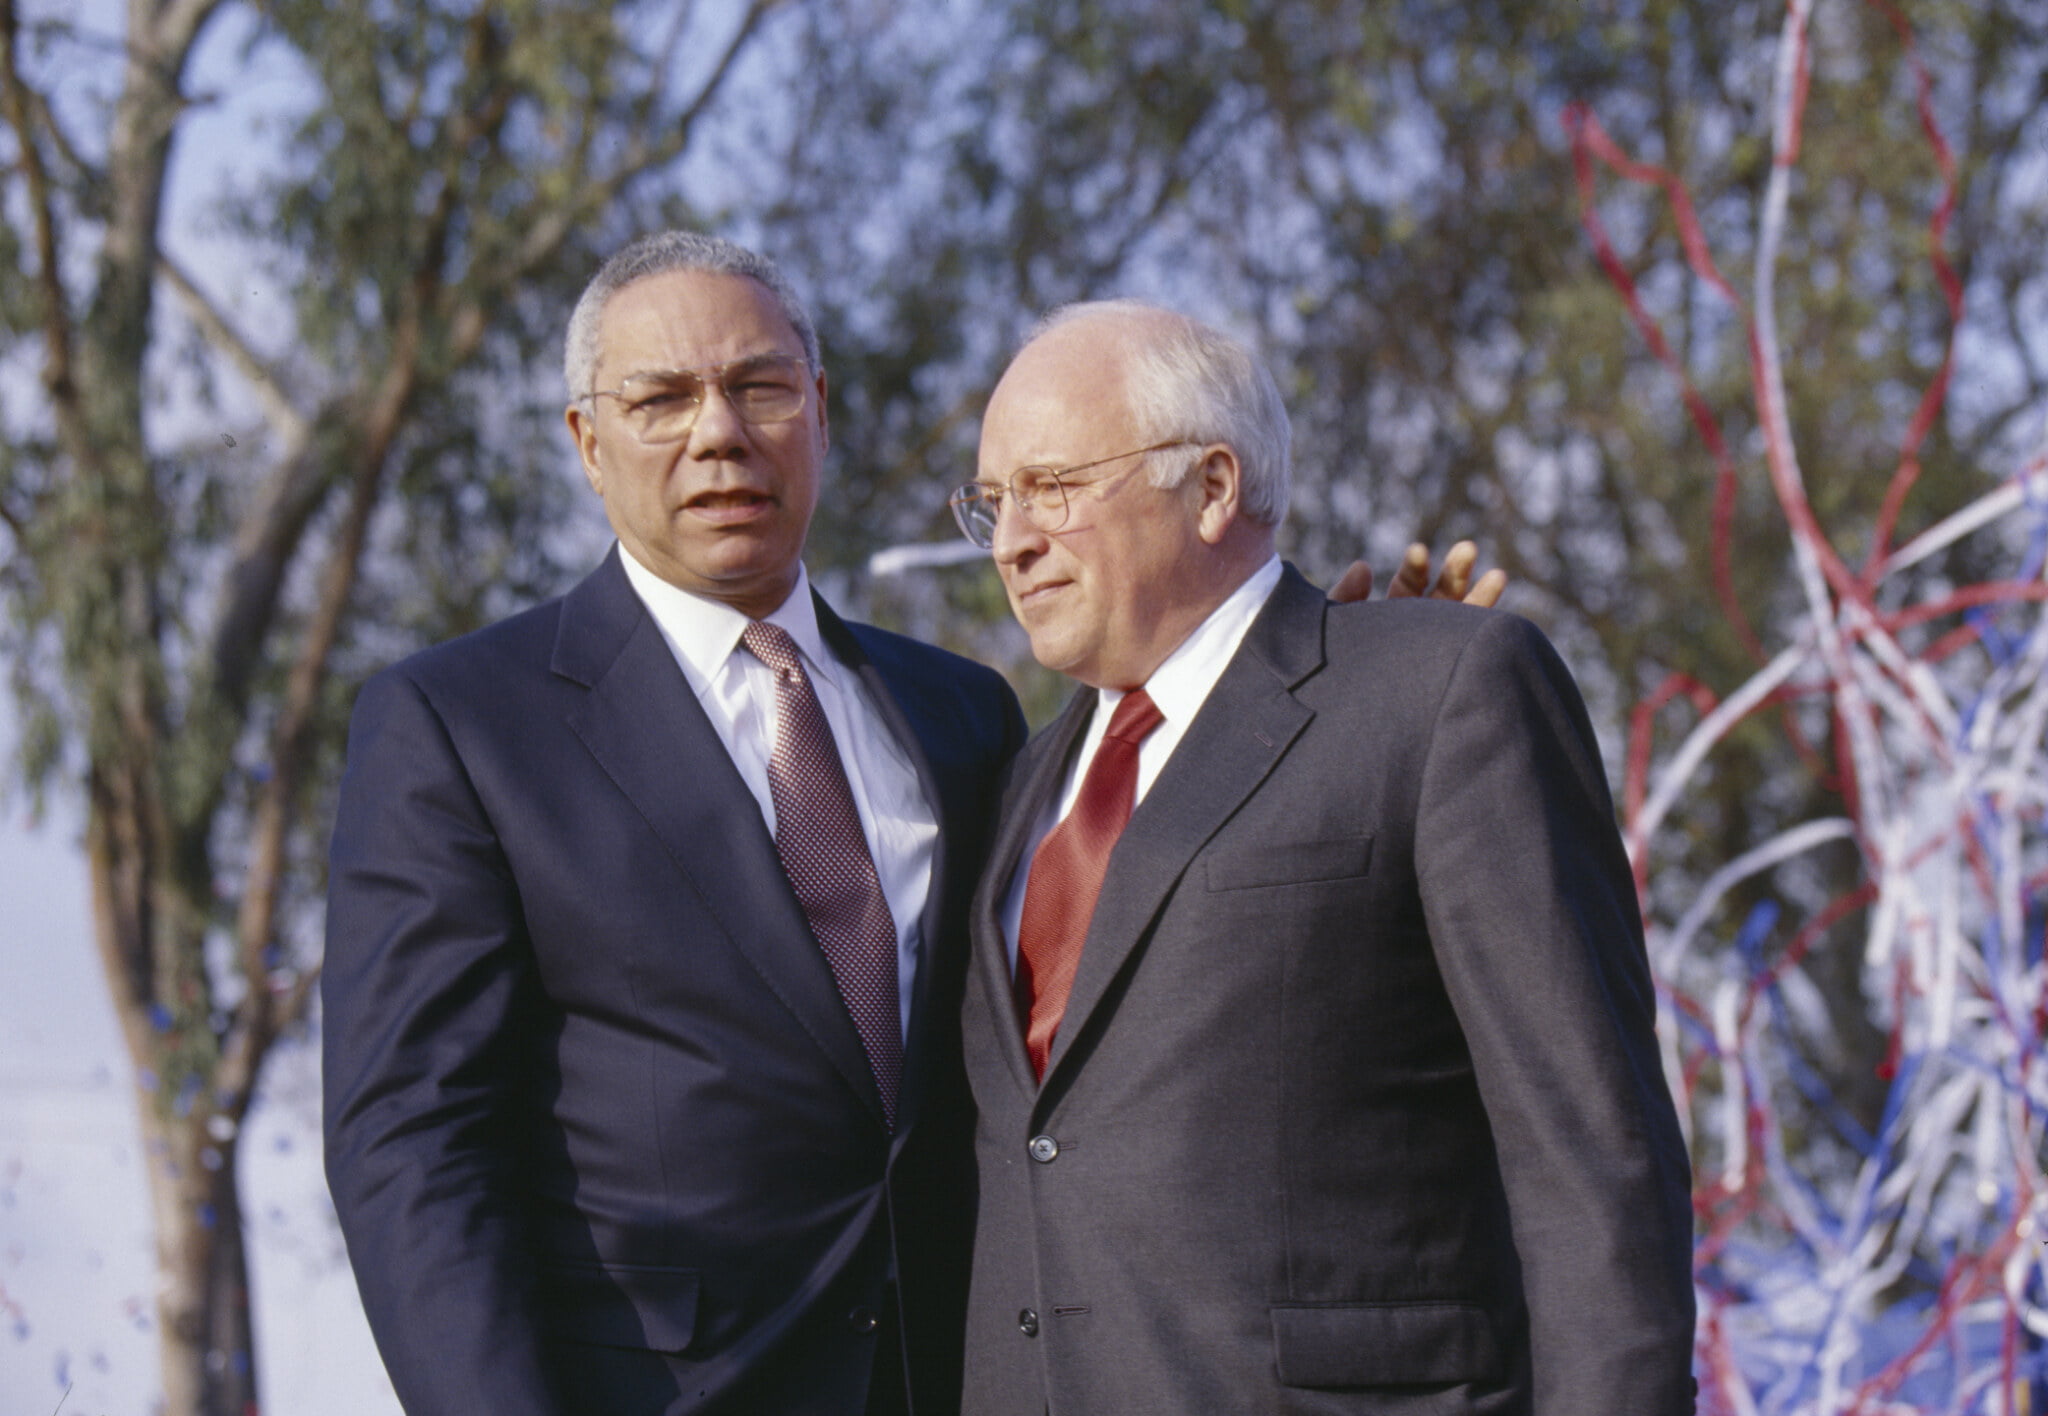 Dick cheney colin powell fall on your sword